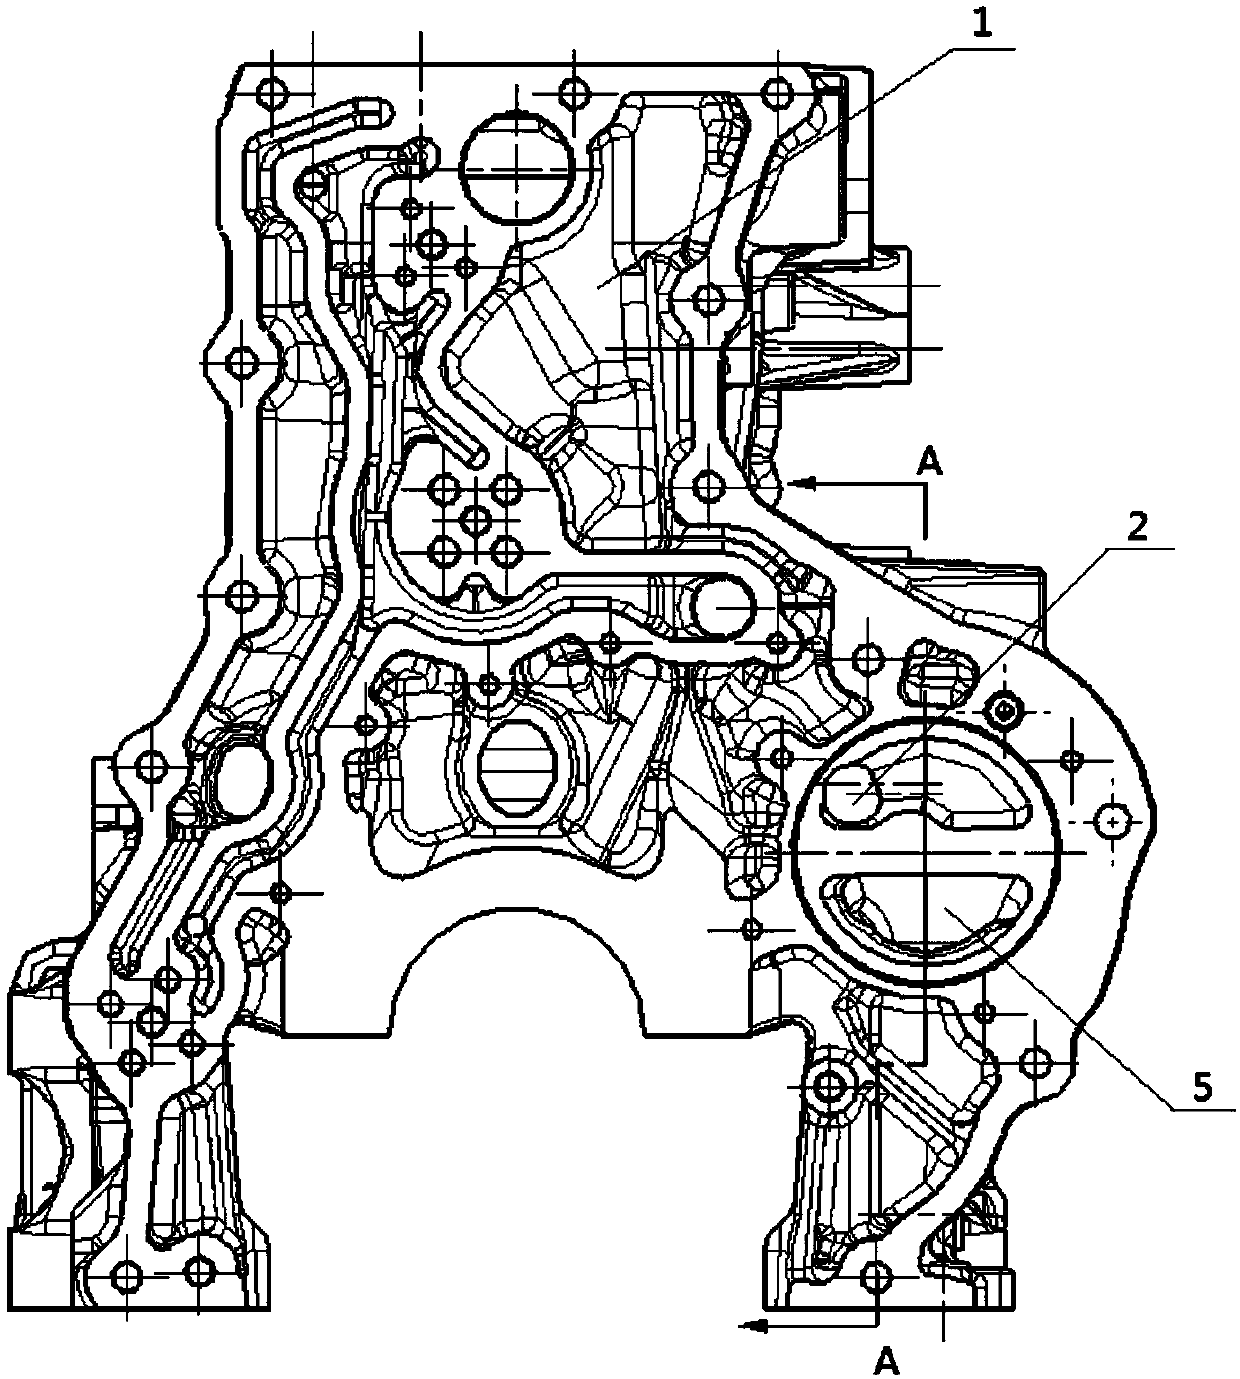 Oil return structure of engine oil pump of engine